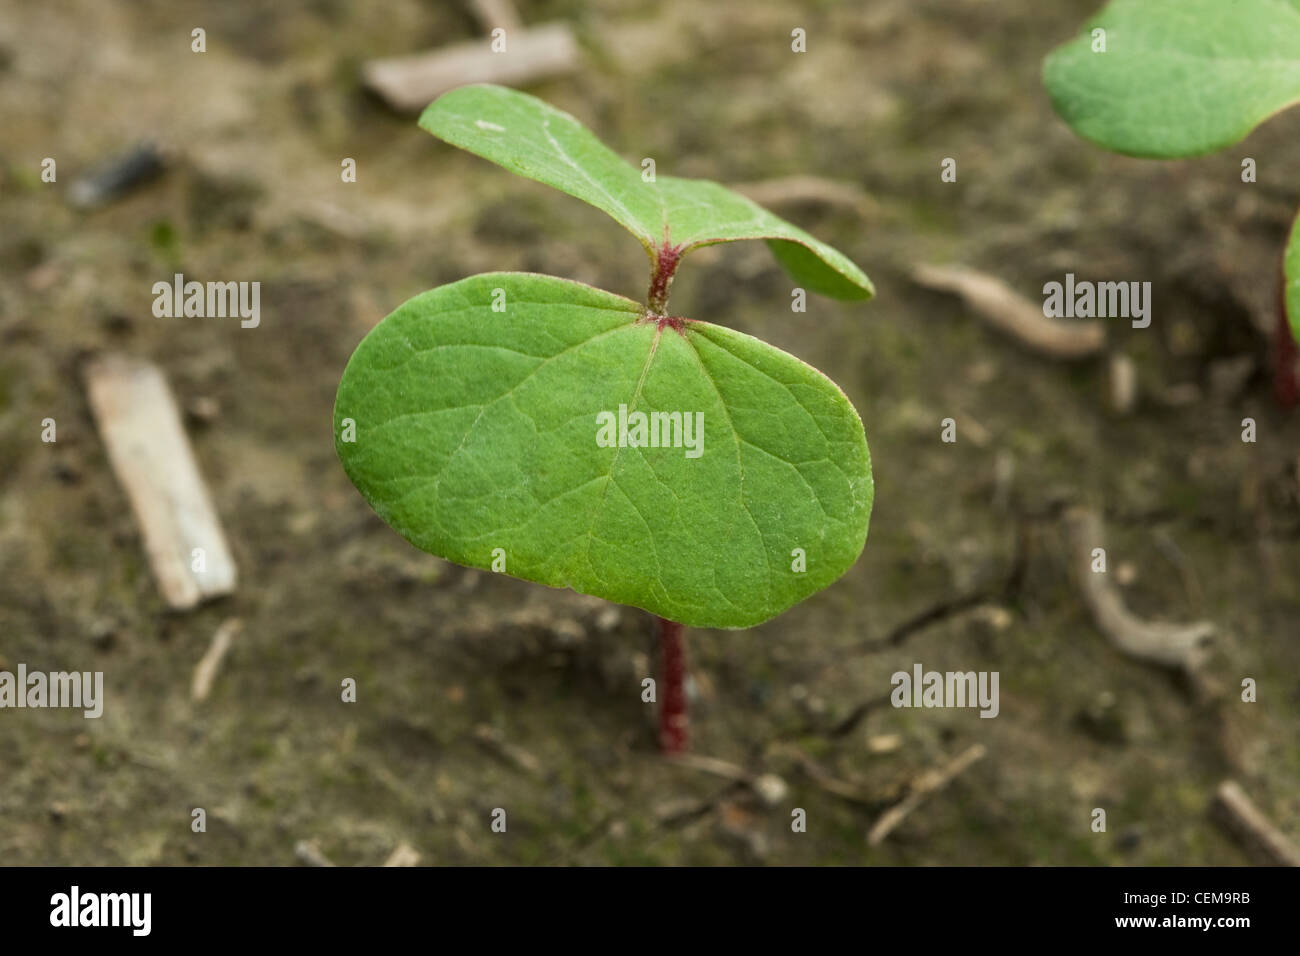 Closeup of a cotton seedling at the cotyledon stage, planted in a conservation tillage field / near England, Arkansas, USA. Stock Photo